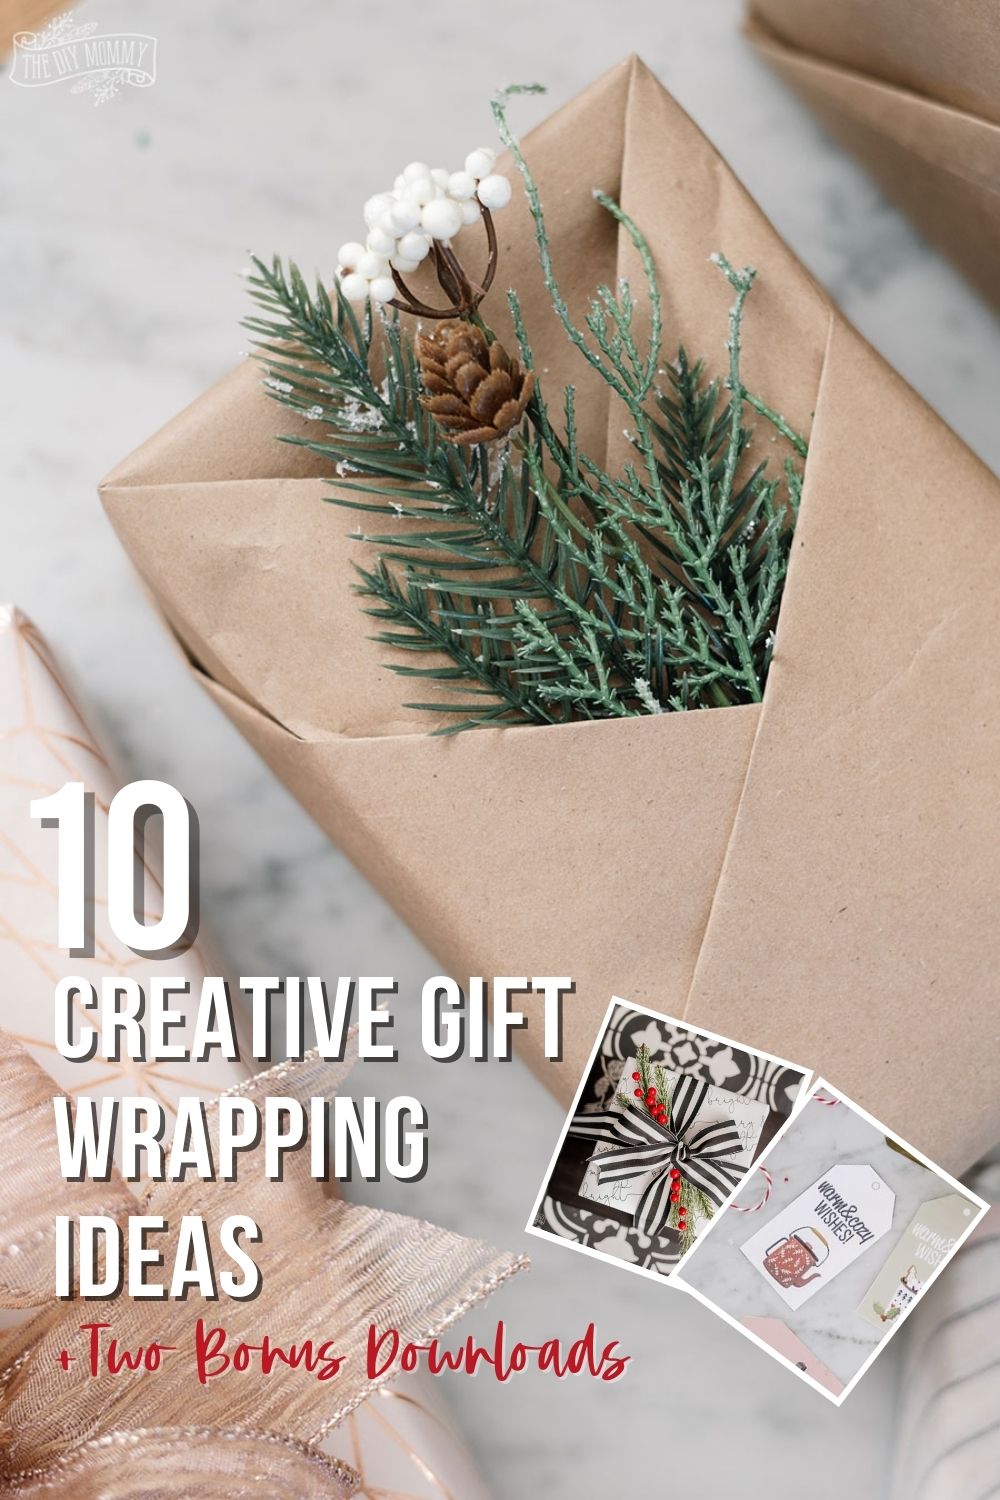 10 Creative Gift Wrapping Ideas